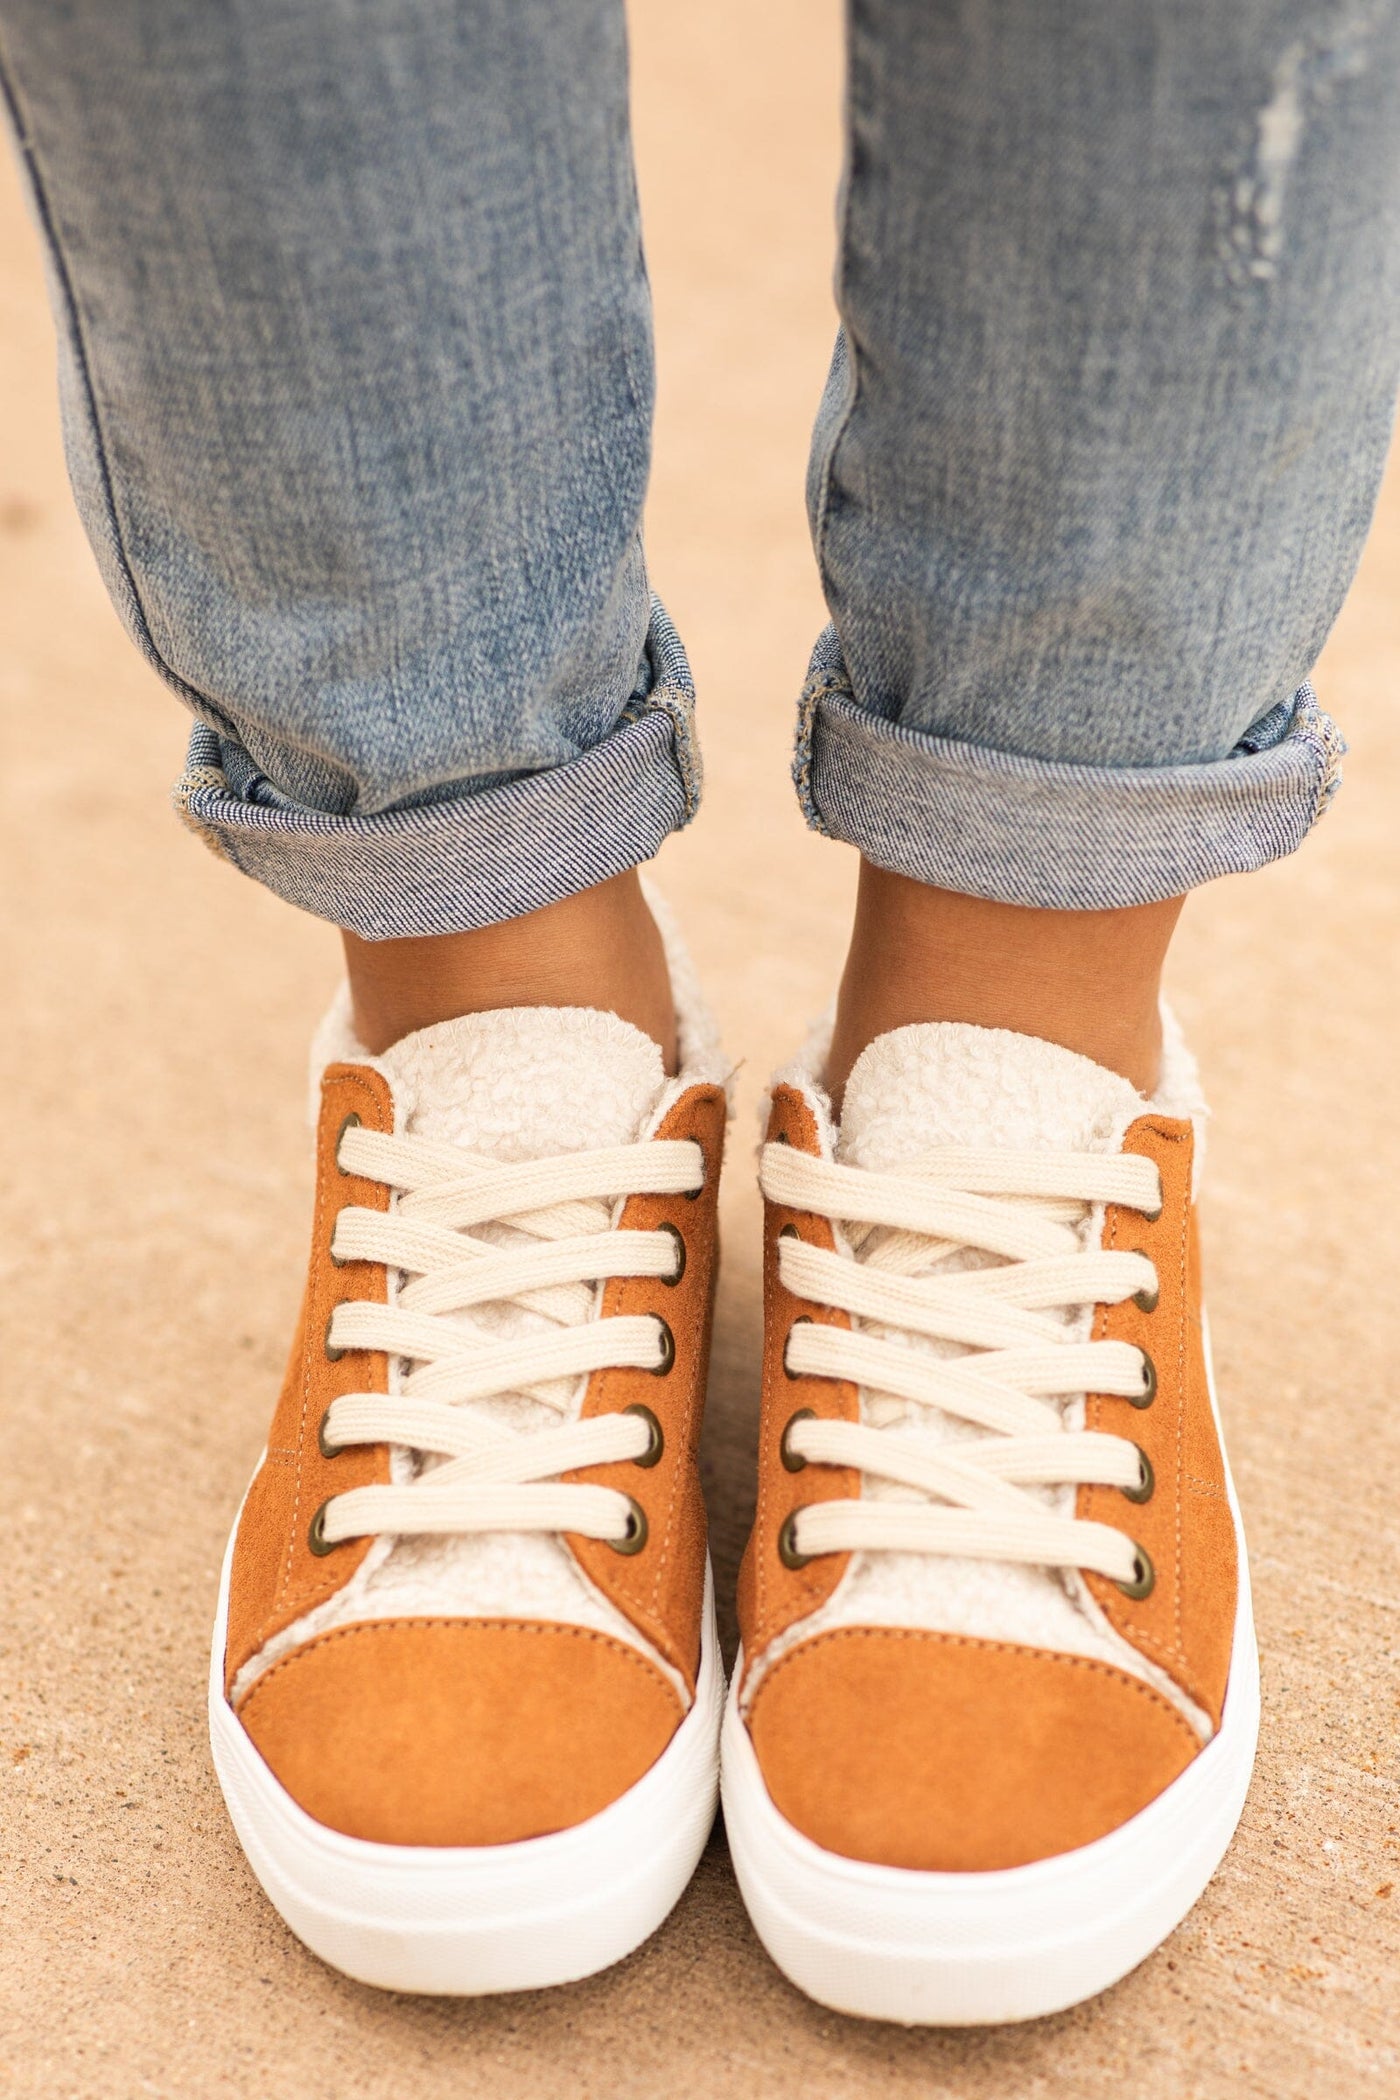 Cinnamon and Beige Lace Up Sneakers - Filly Flair